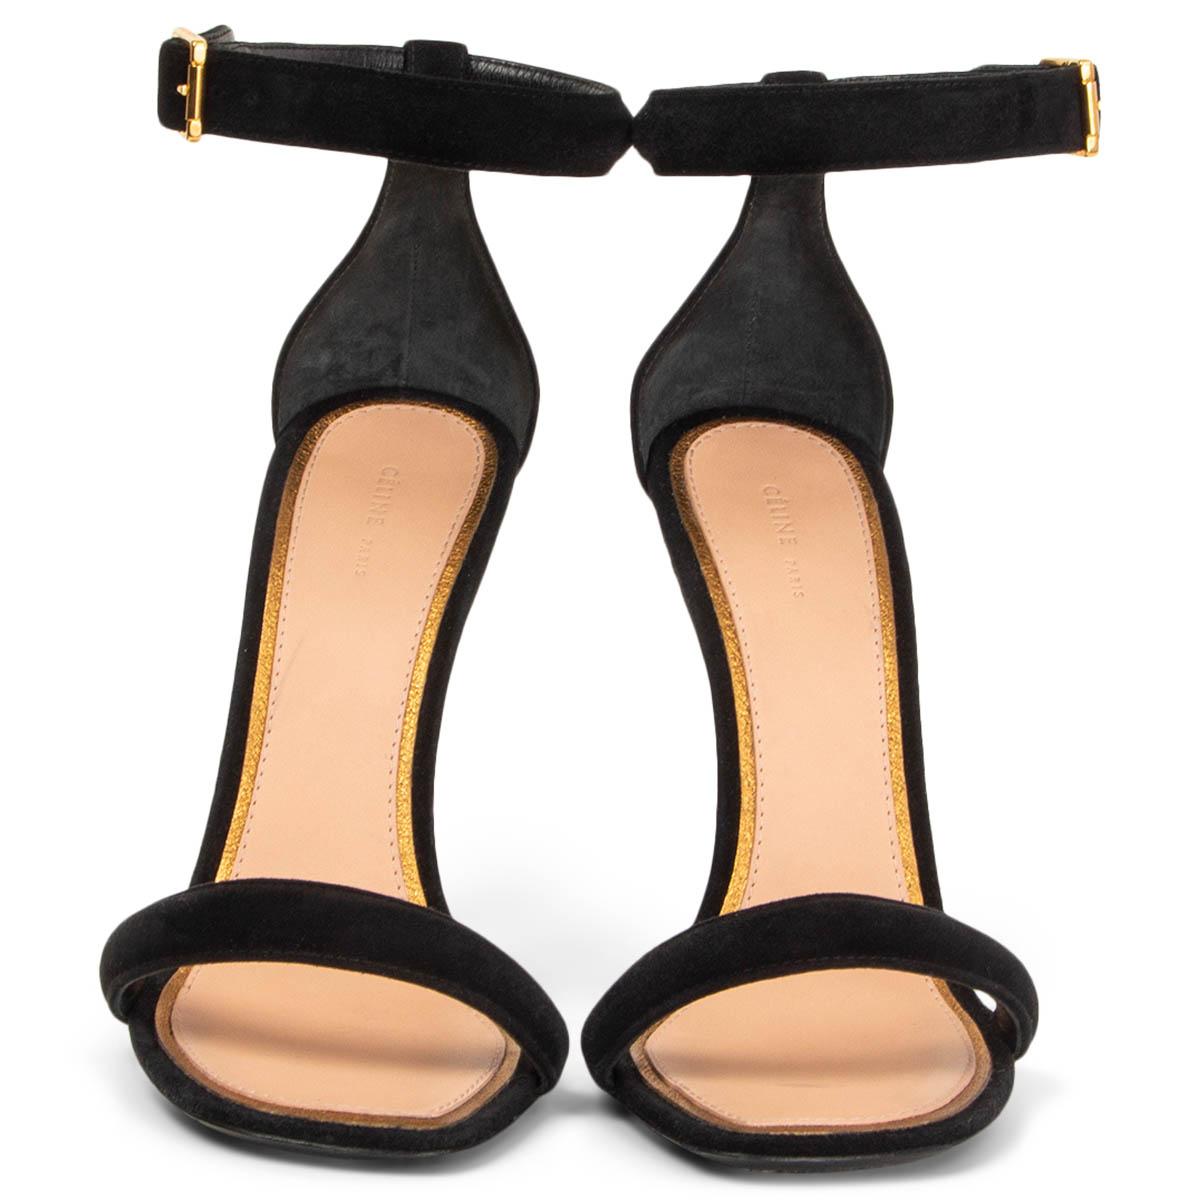 100% authentic Céline ankle-strap high heels in black suede featuring a gold-tone metal buckle. Have been worn and are in excellent condition. 

Measurements
Imprinted Size	37
Shoe Size	37
Inside Sole	23.5cm (9.2in)
Width	7cm (2.7in)
Heel	11cm